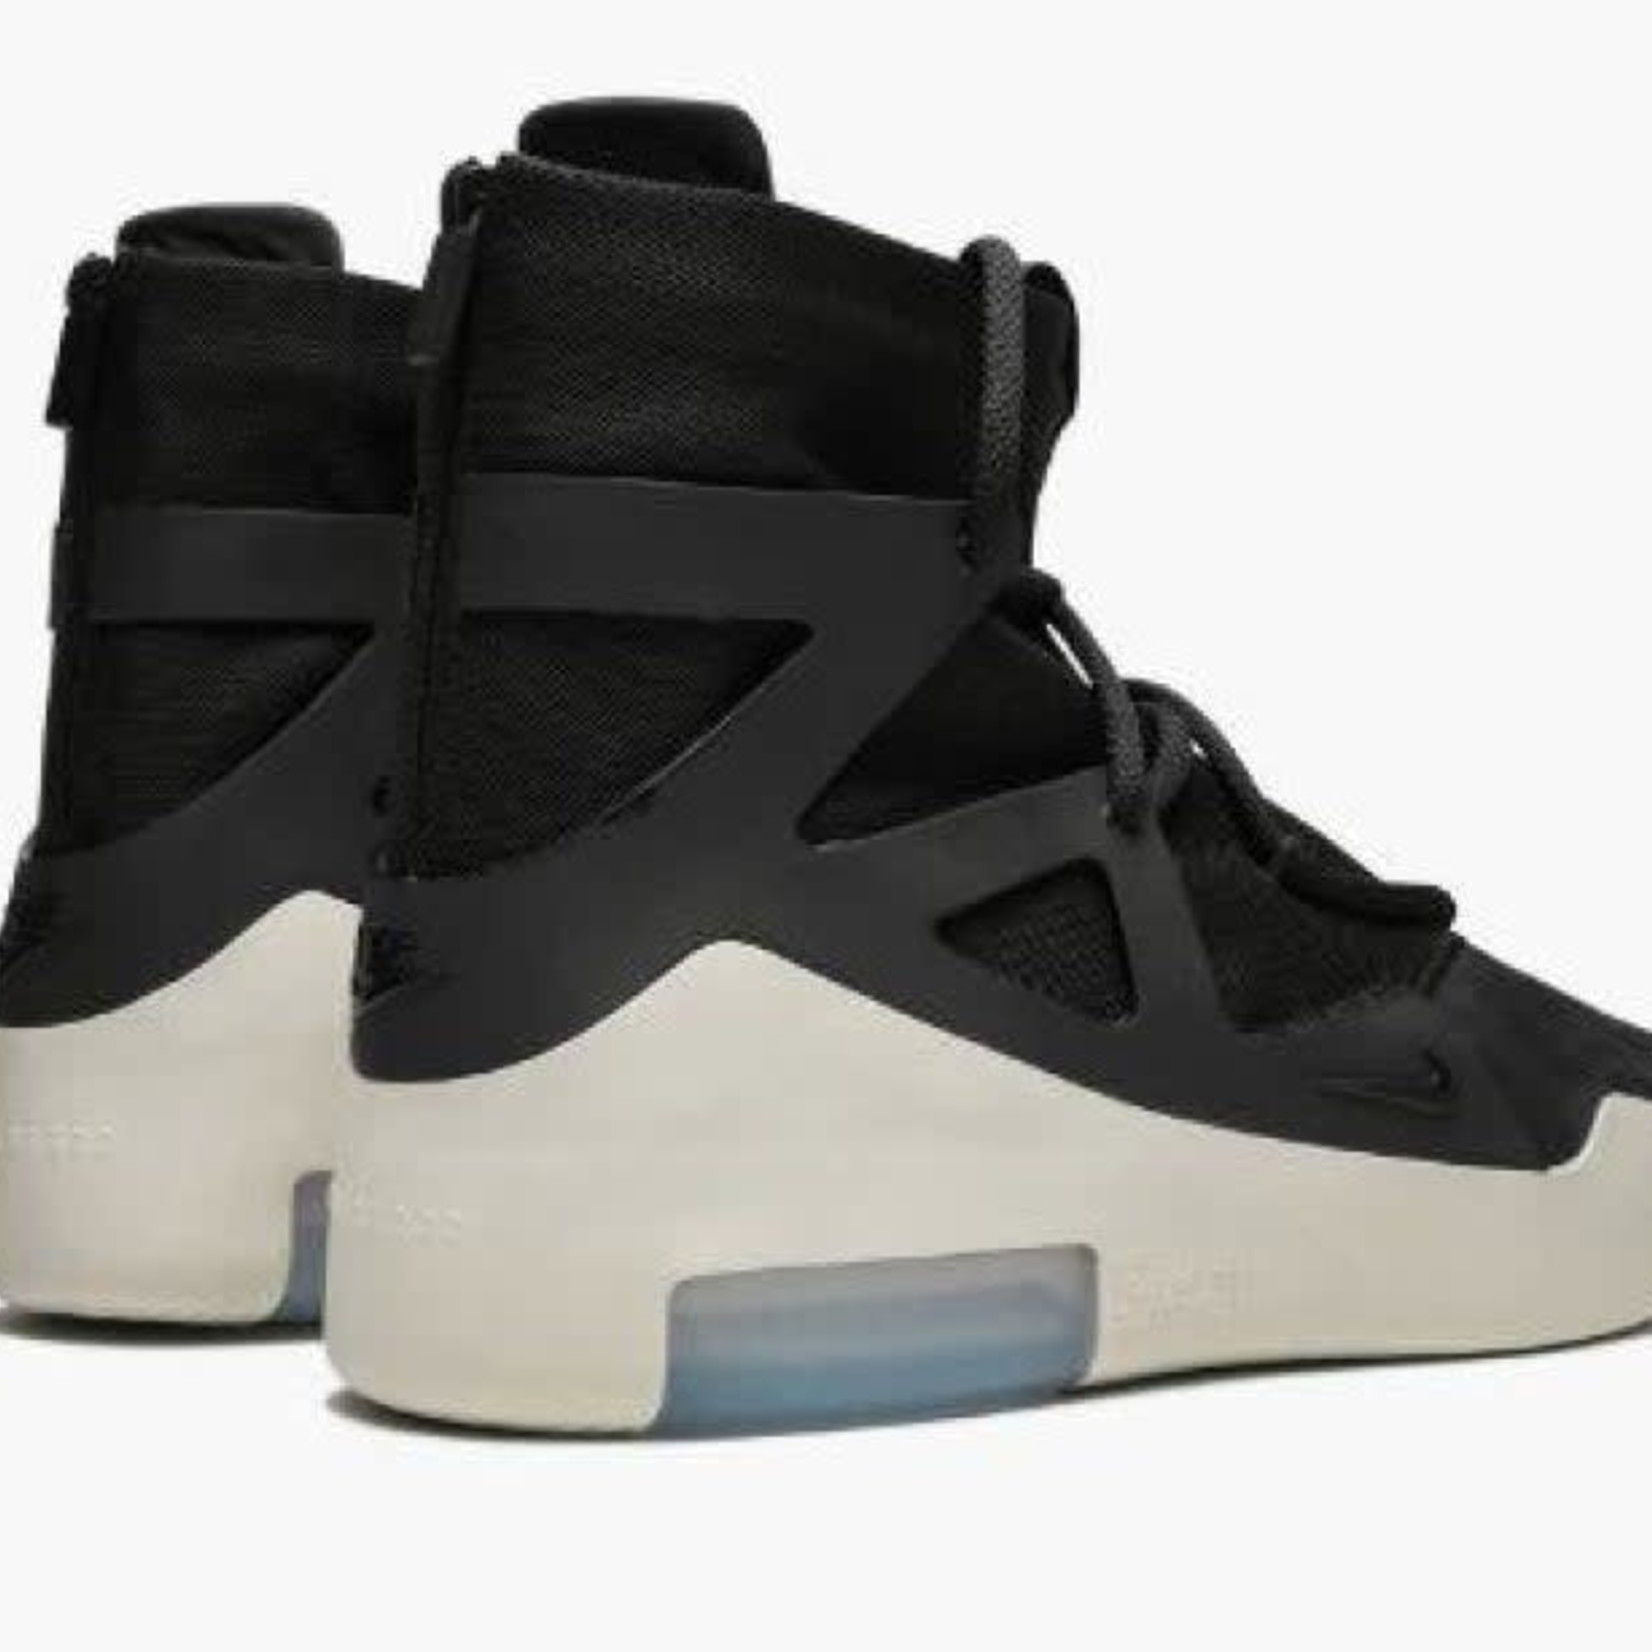 Nike Air Fear Of God 1 "String The Question"